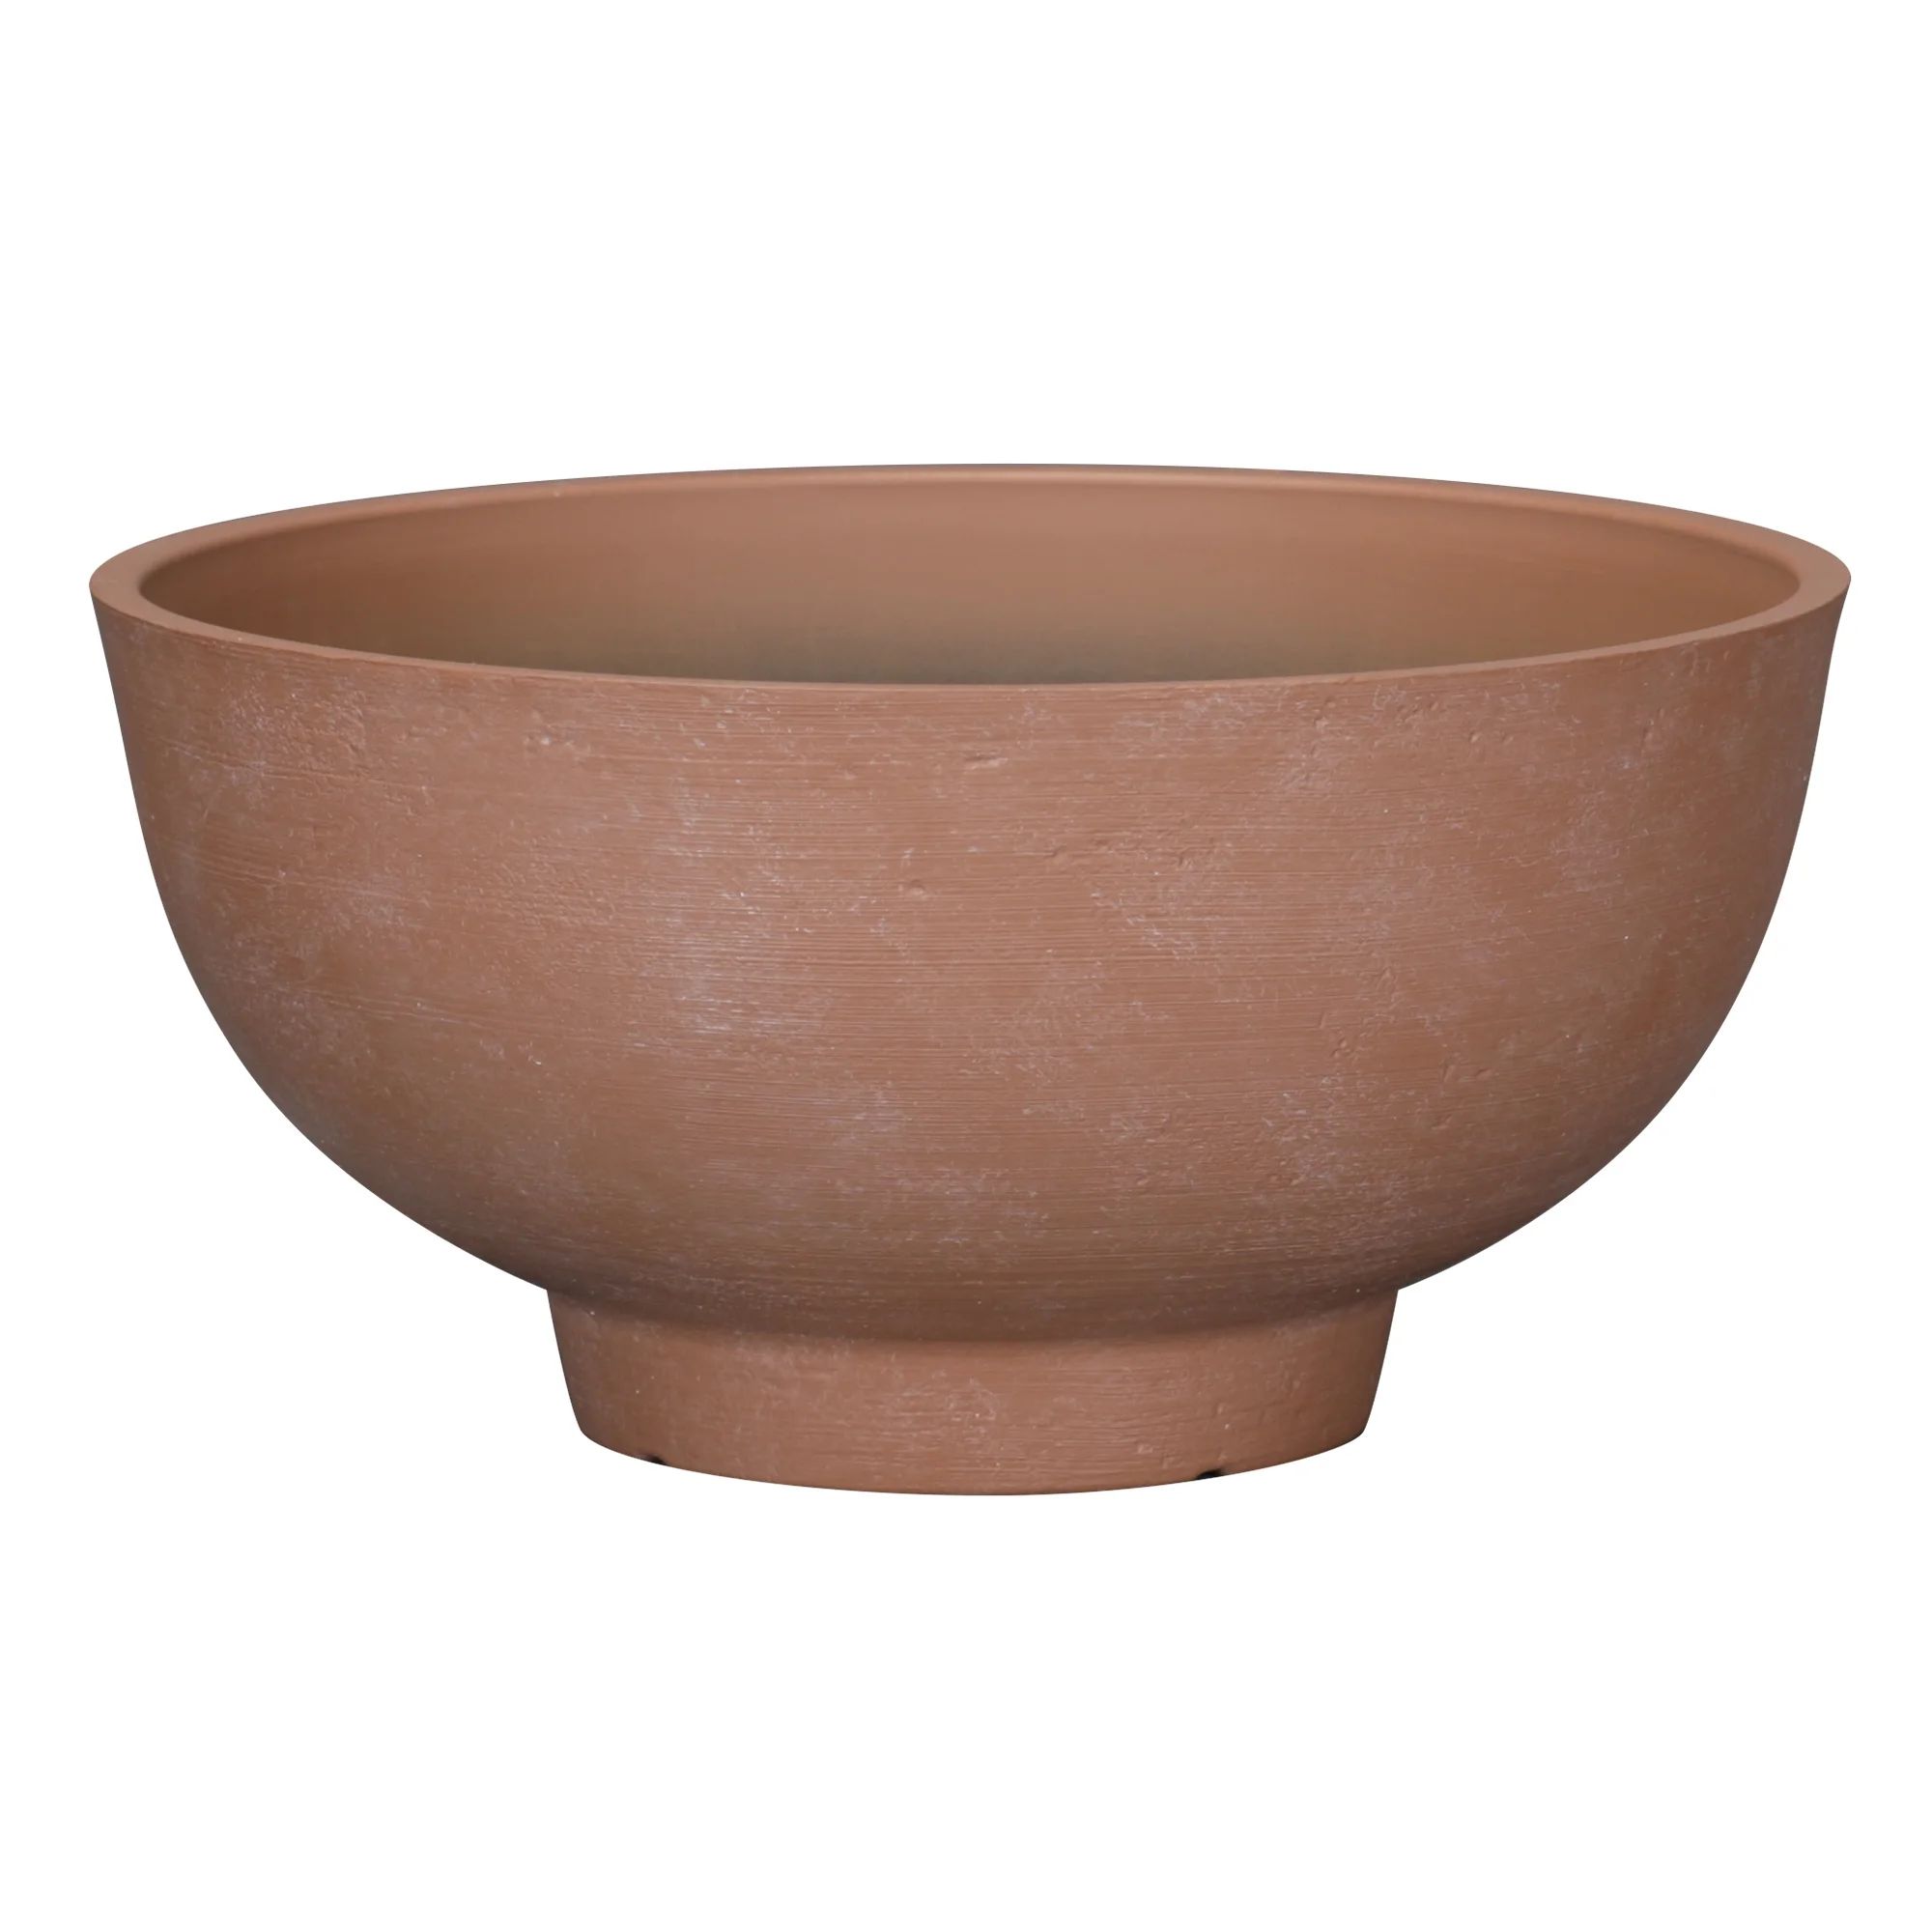 Better Homes & Gardens Terracotta Recycled Resin Planter,12in x 12in x 6in | Walmart (US)